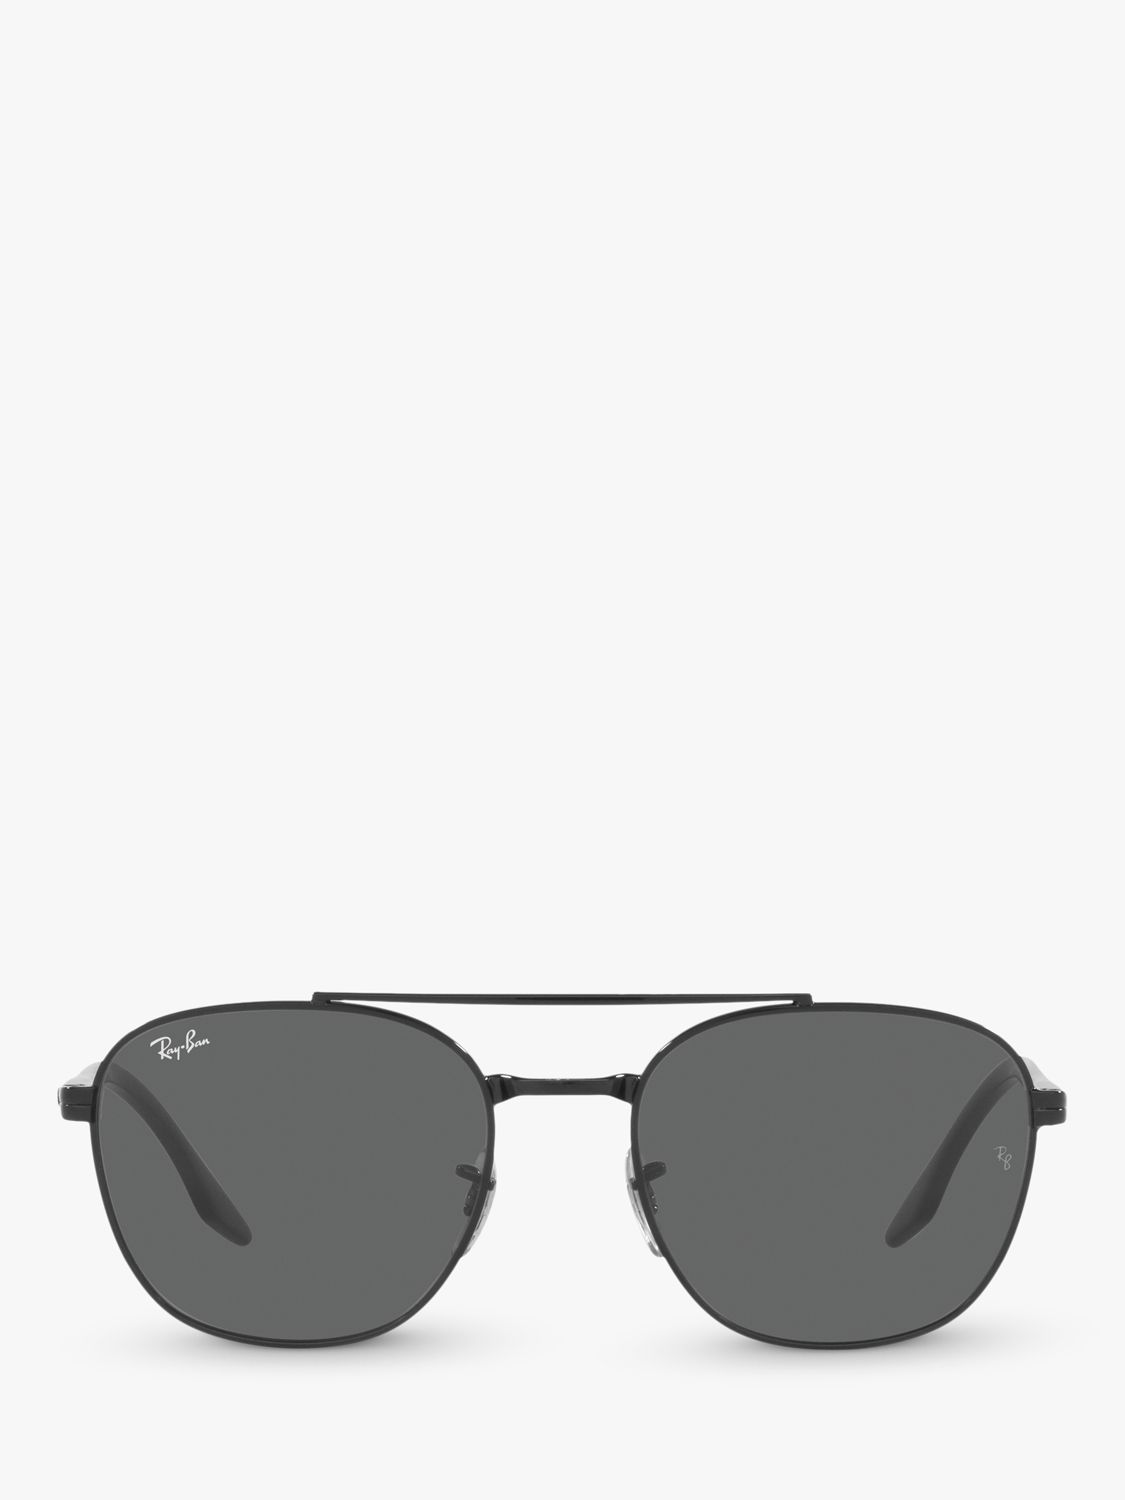 Ray Ban Rb3688 Unisex Square Sunglasses Blackgrey At John Lewis And Partners 7479